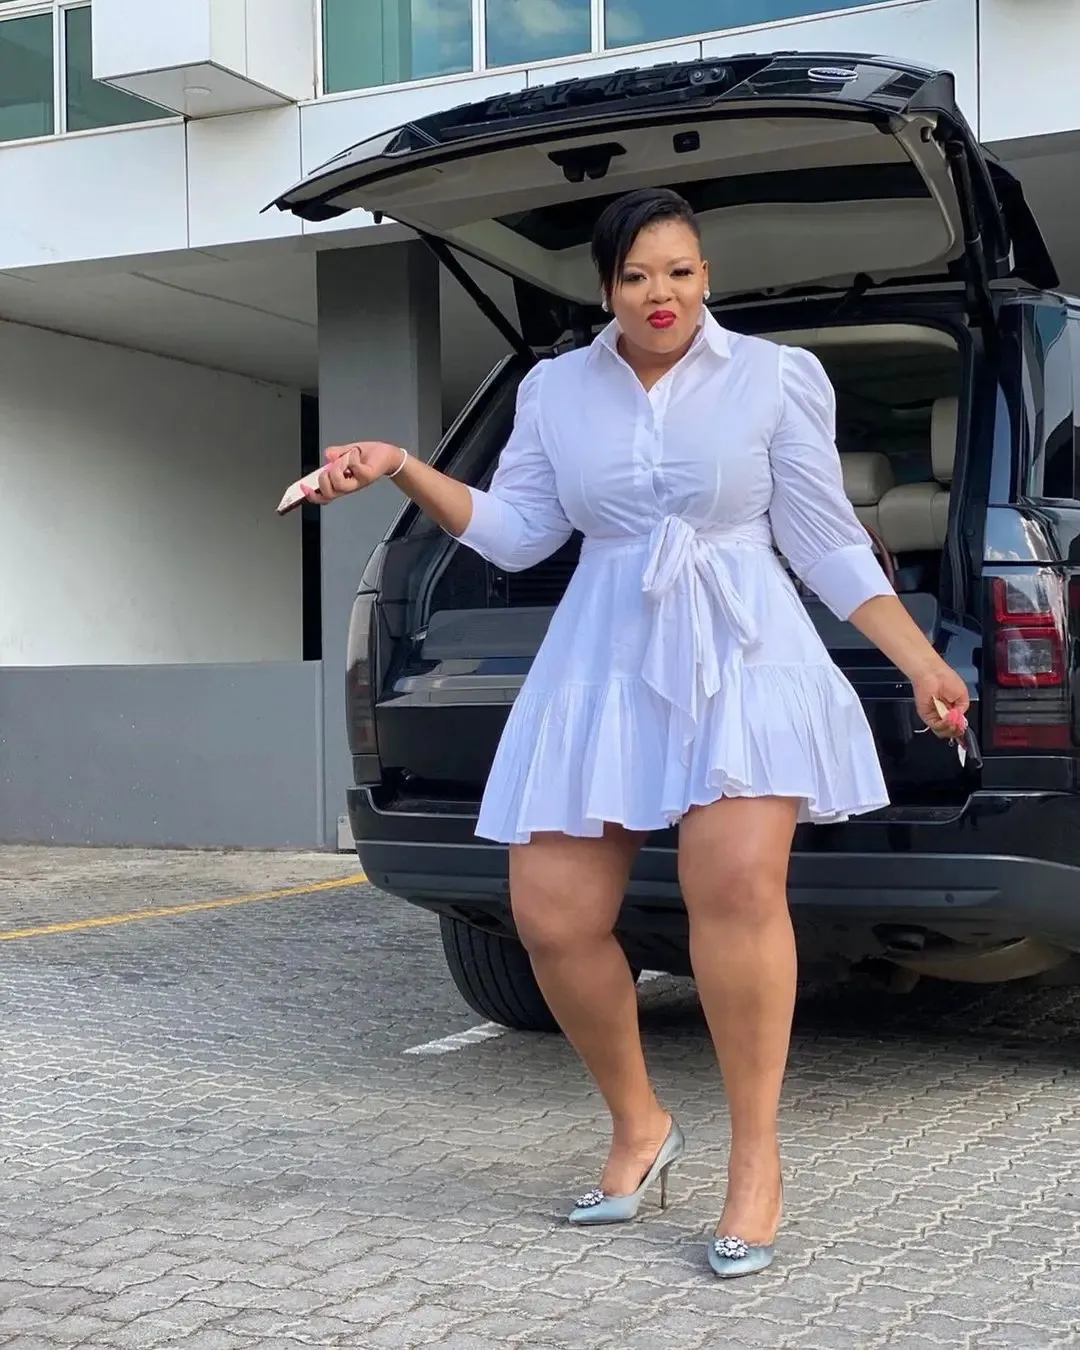 Anele Mdoda called a liar for claiming she buys second-hand cars